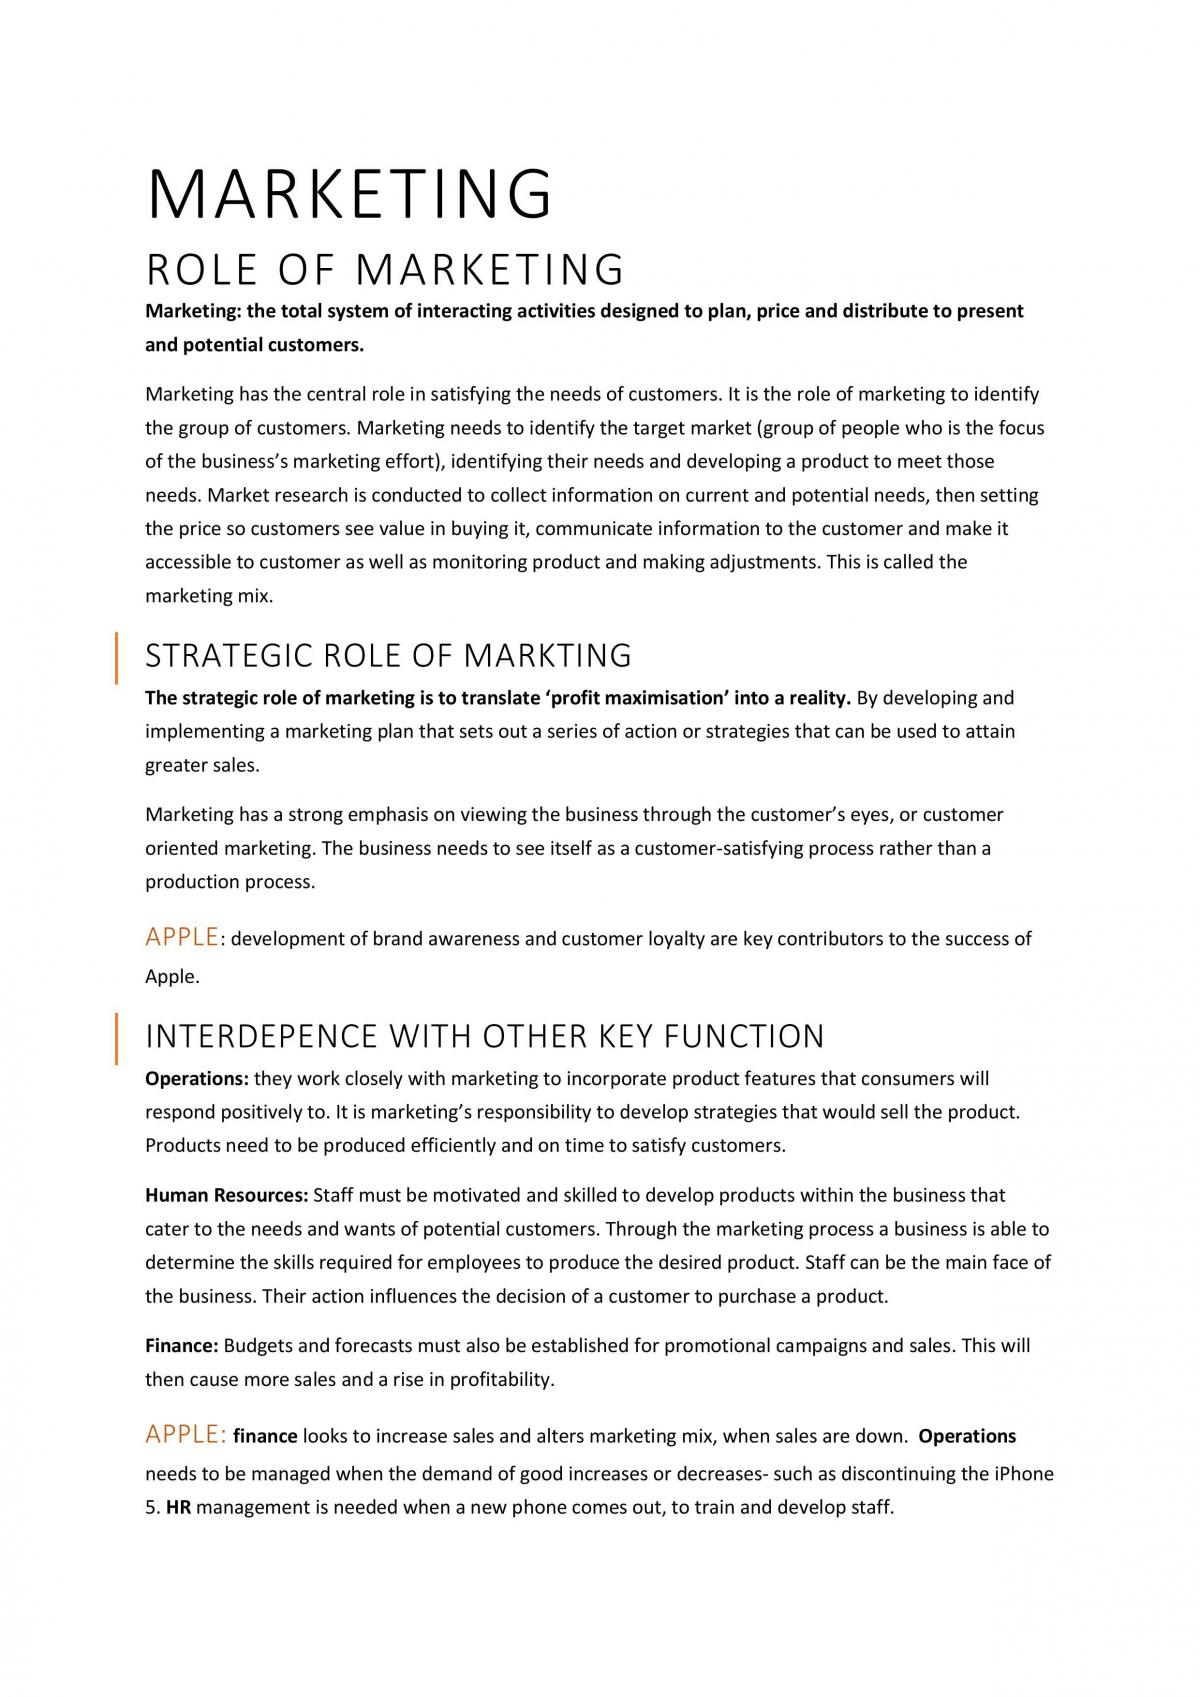 Marketing Notes w/ Apple Case Study - Page 1